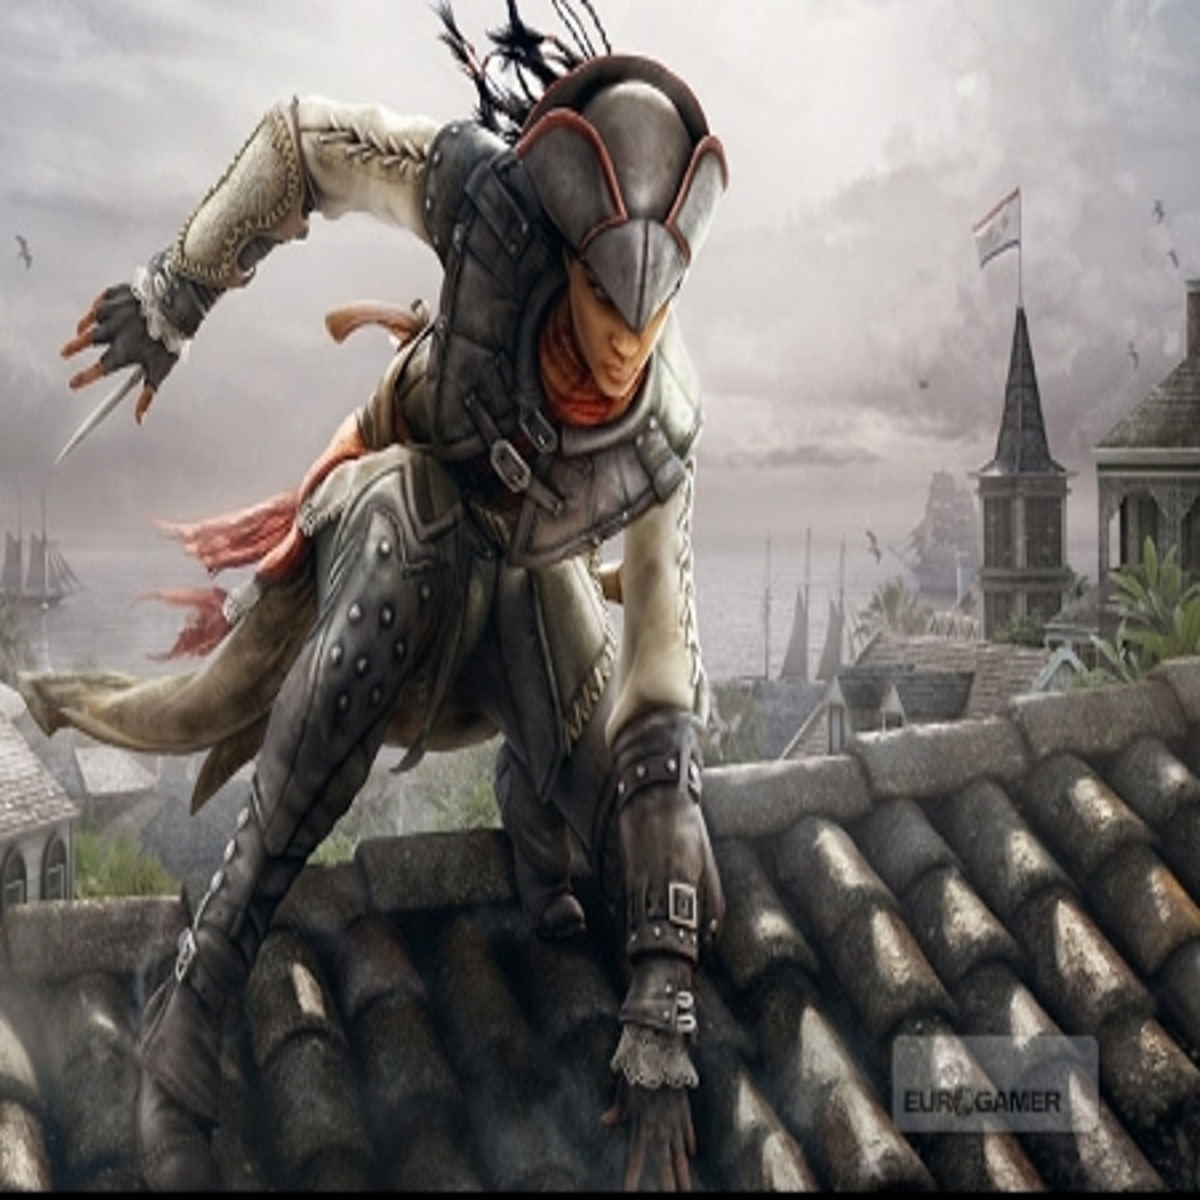 Are Assassin's Creed 3 and Liberation different games? - Quora